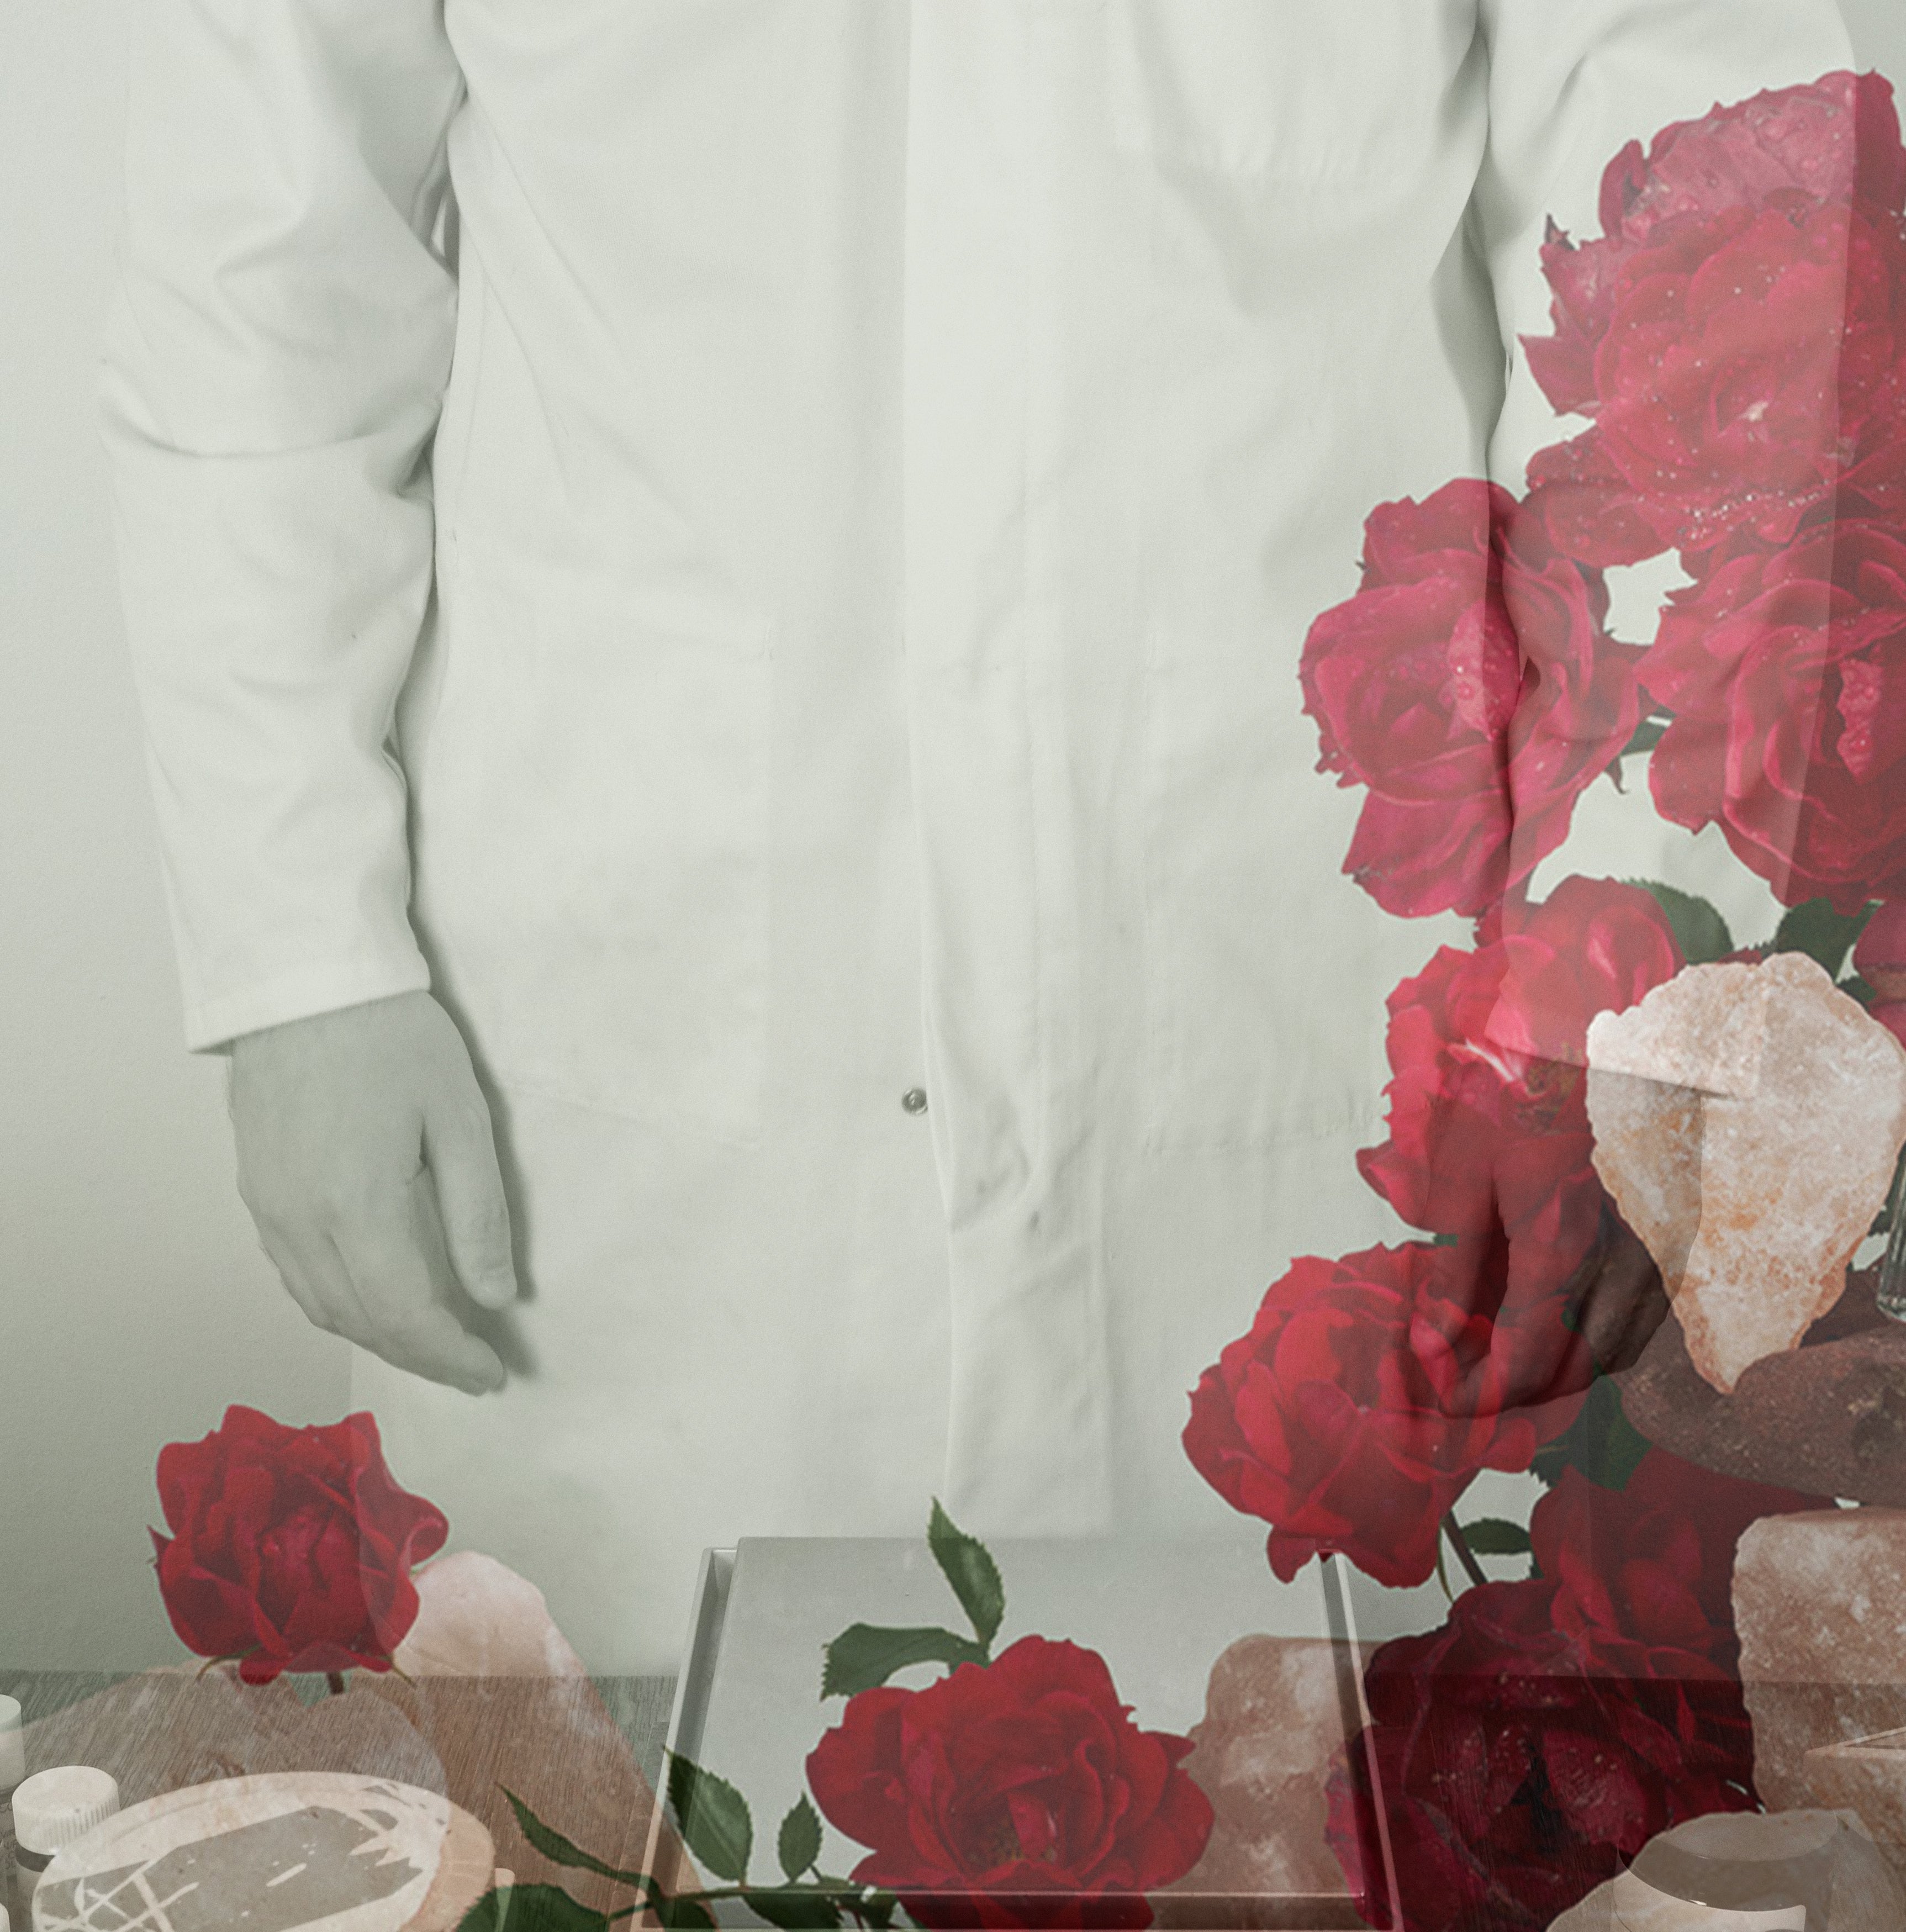 Perfumer standing with scales wearing white lab coat, image overlaid with roses